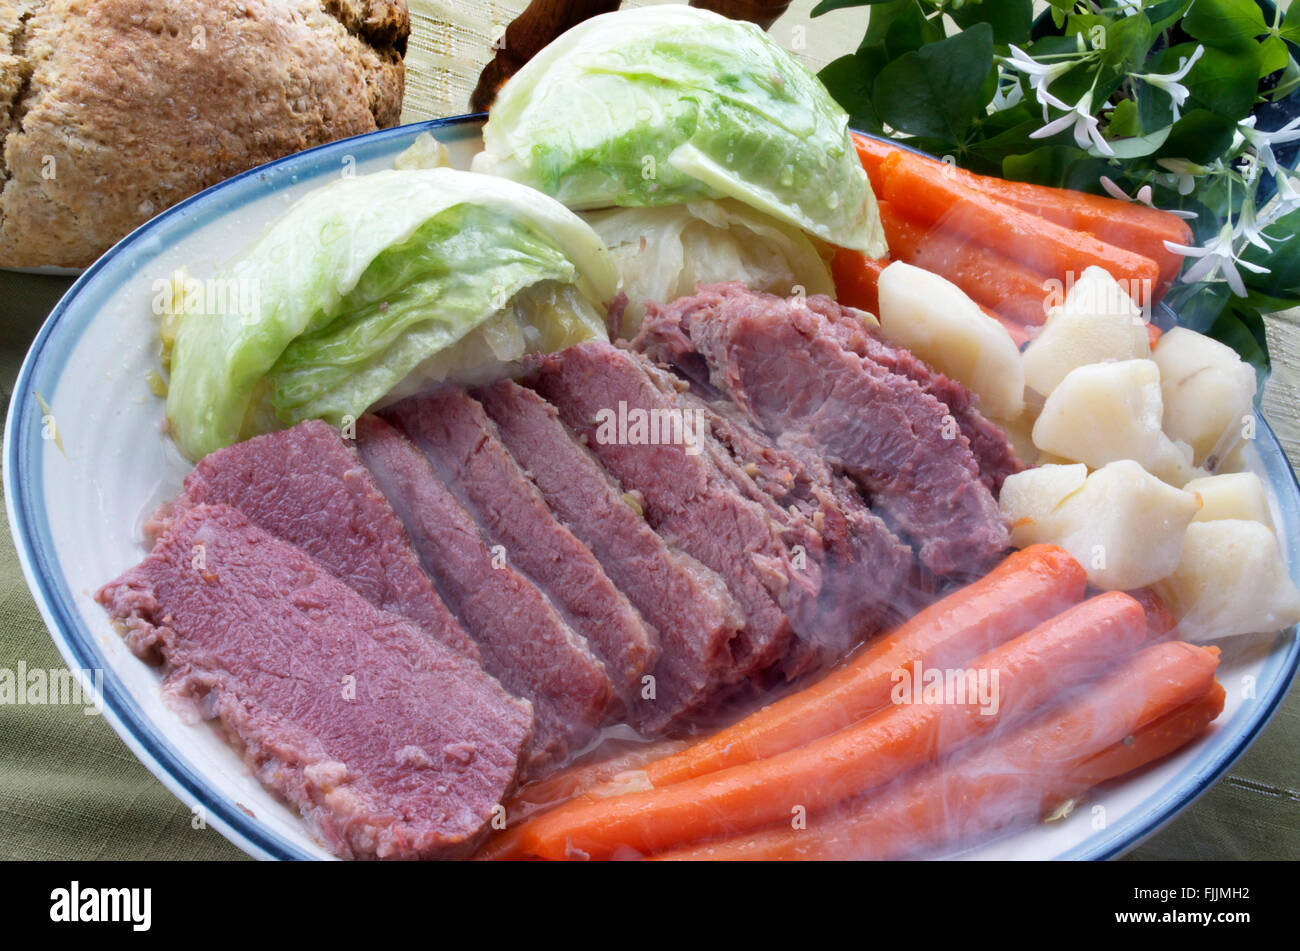 Corned Beef and Cabbage Meal Stock Photo